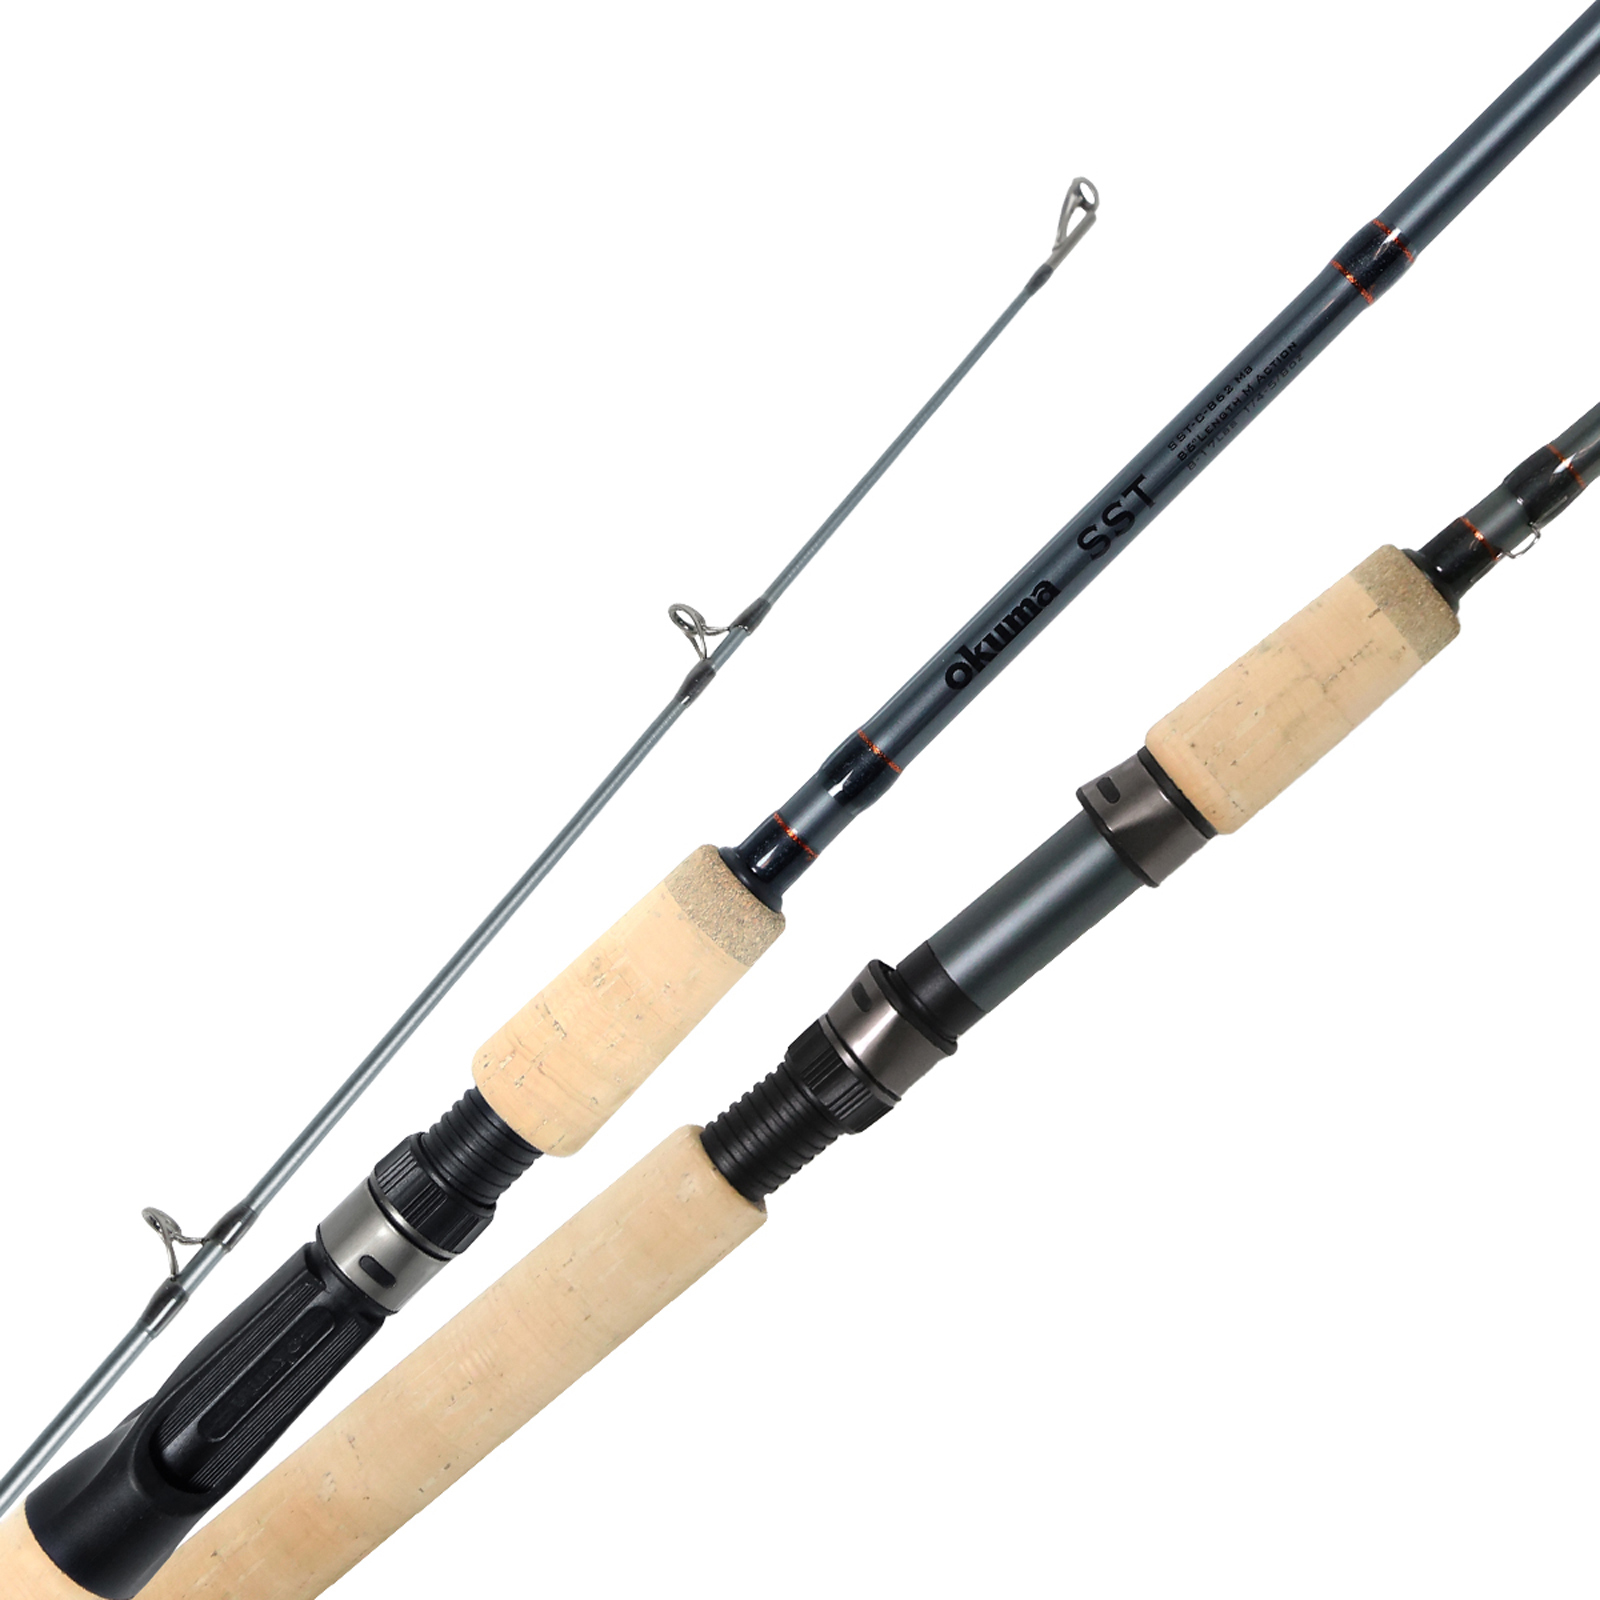 Okuma SST A Series Medium Spinning Rod with Cork Grip, 8 - 17 lbs, 1/4 -  5/8oz, 2 Piece SST-S-862Ma , $4.00 Off with Free S&H — CampSaver